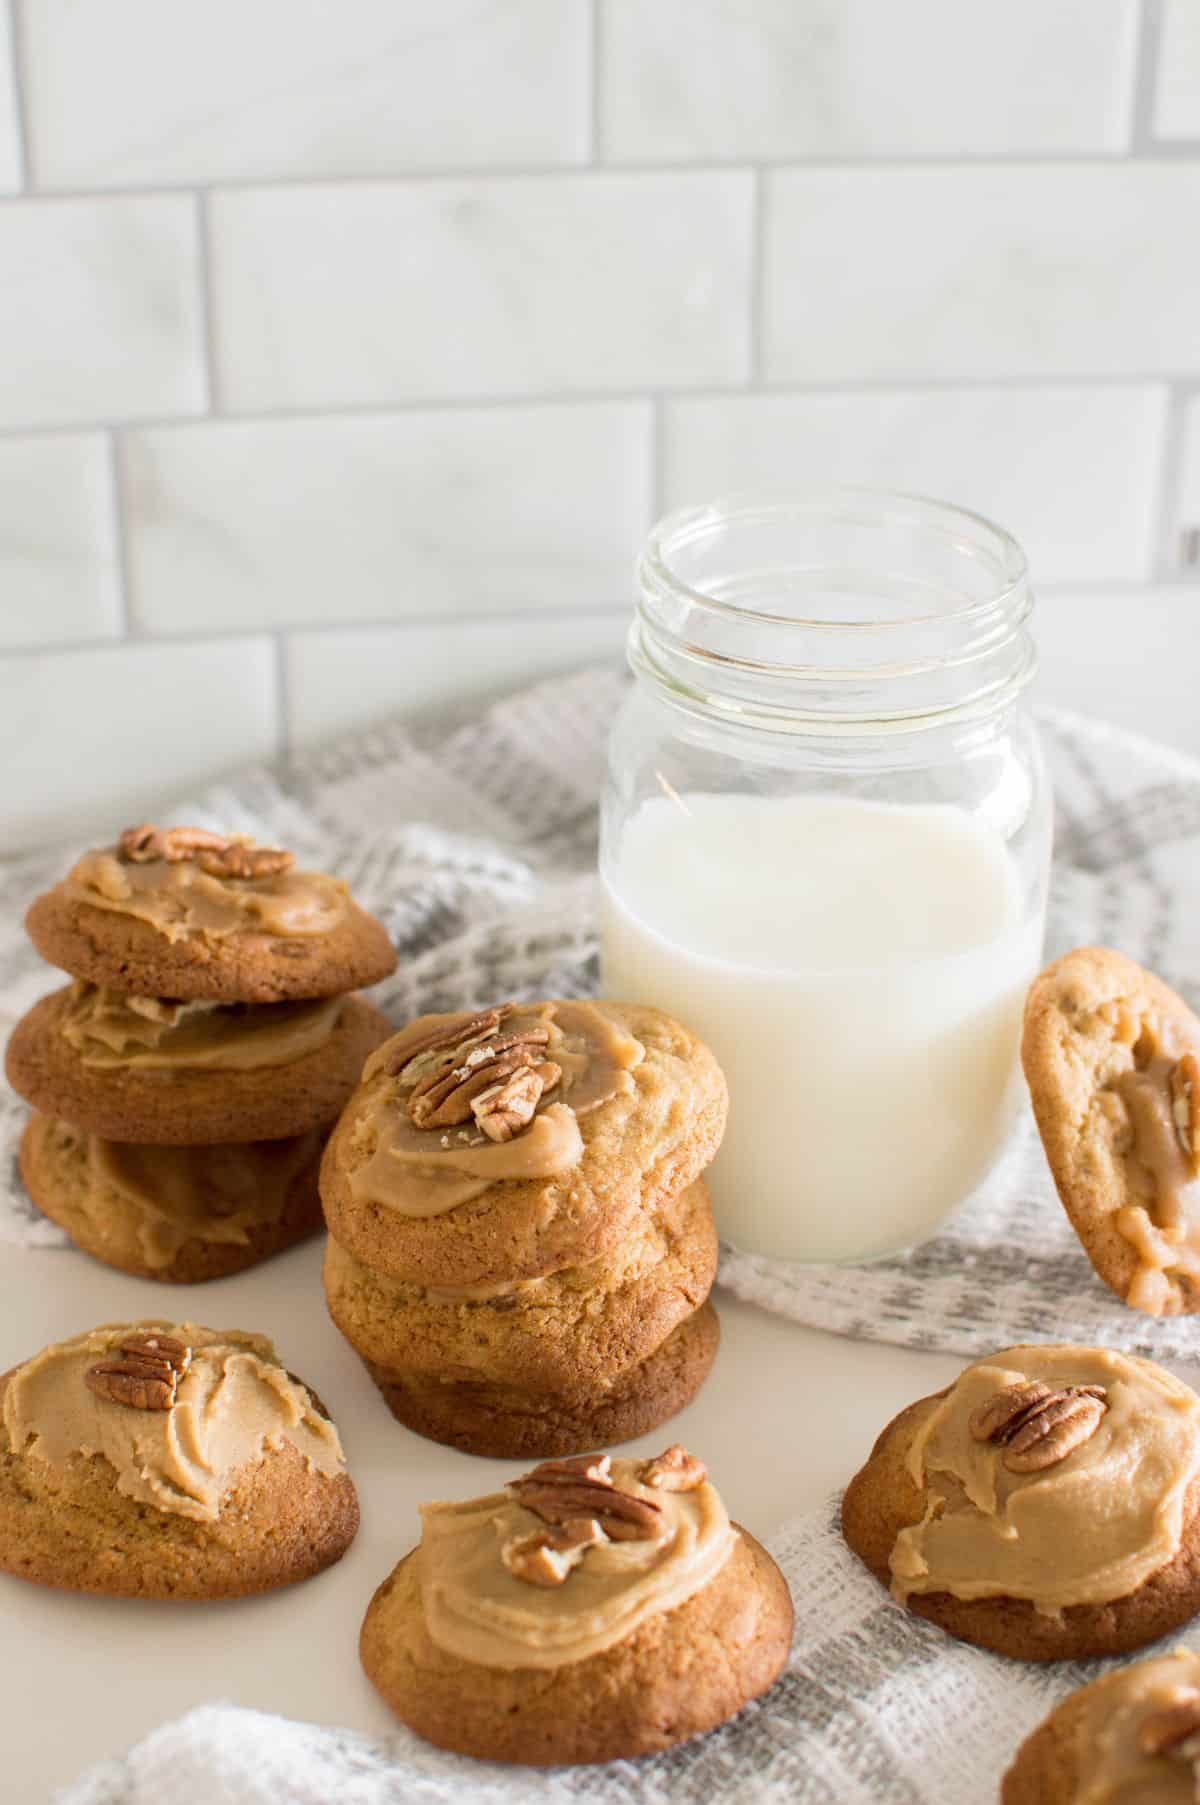 Brown Sugar Pecan Cookies on a white and grey cloth with a glass of milk on the side.